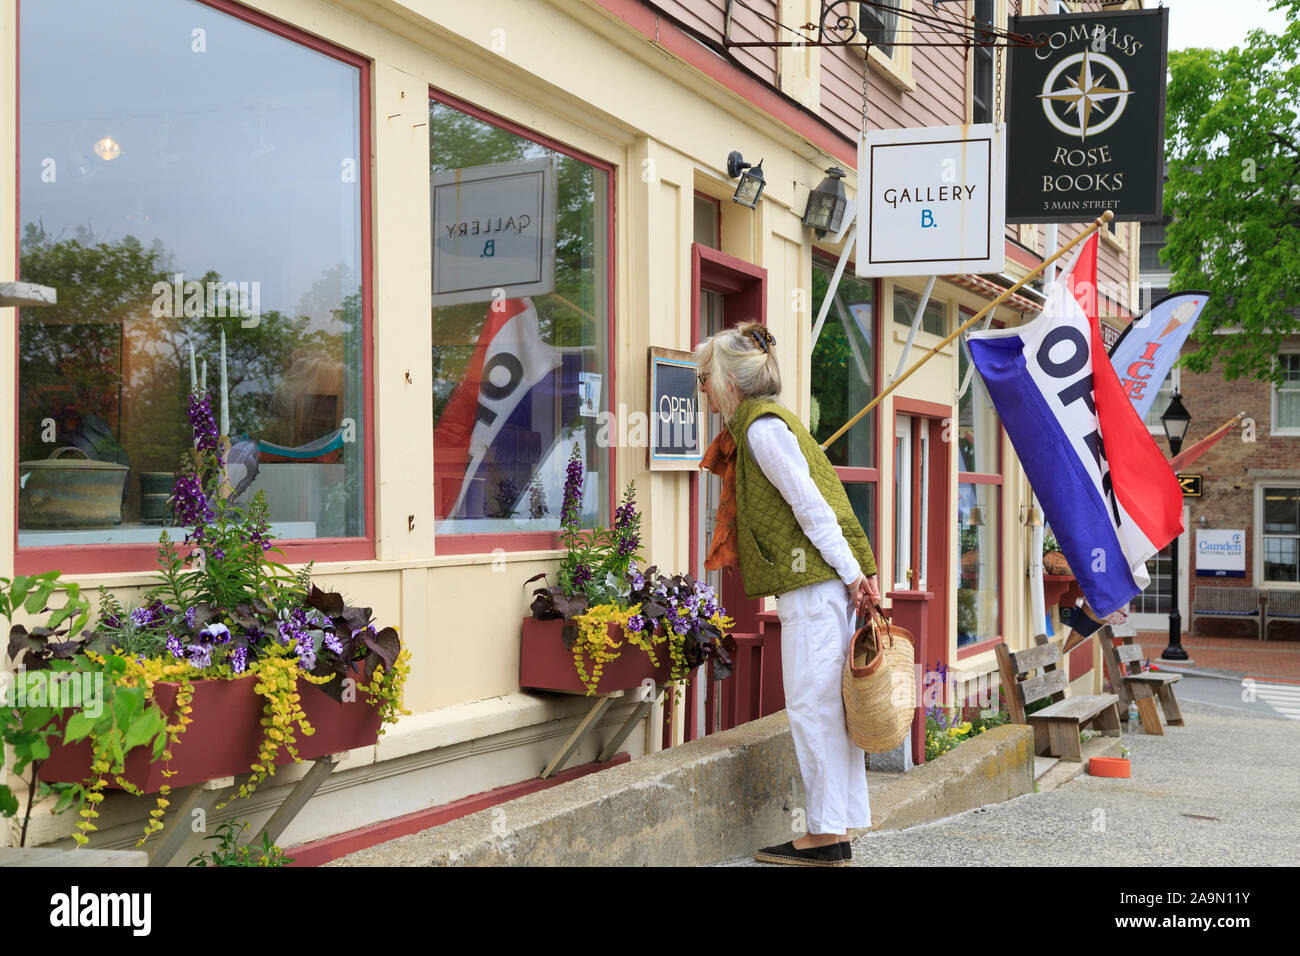 Main Street shops and shoppers in a small New England town, Castine, Maine, USA Stock Photo